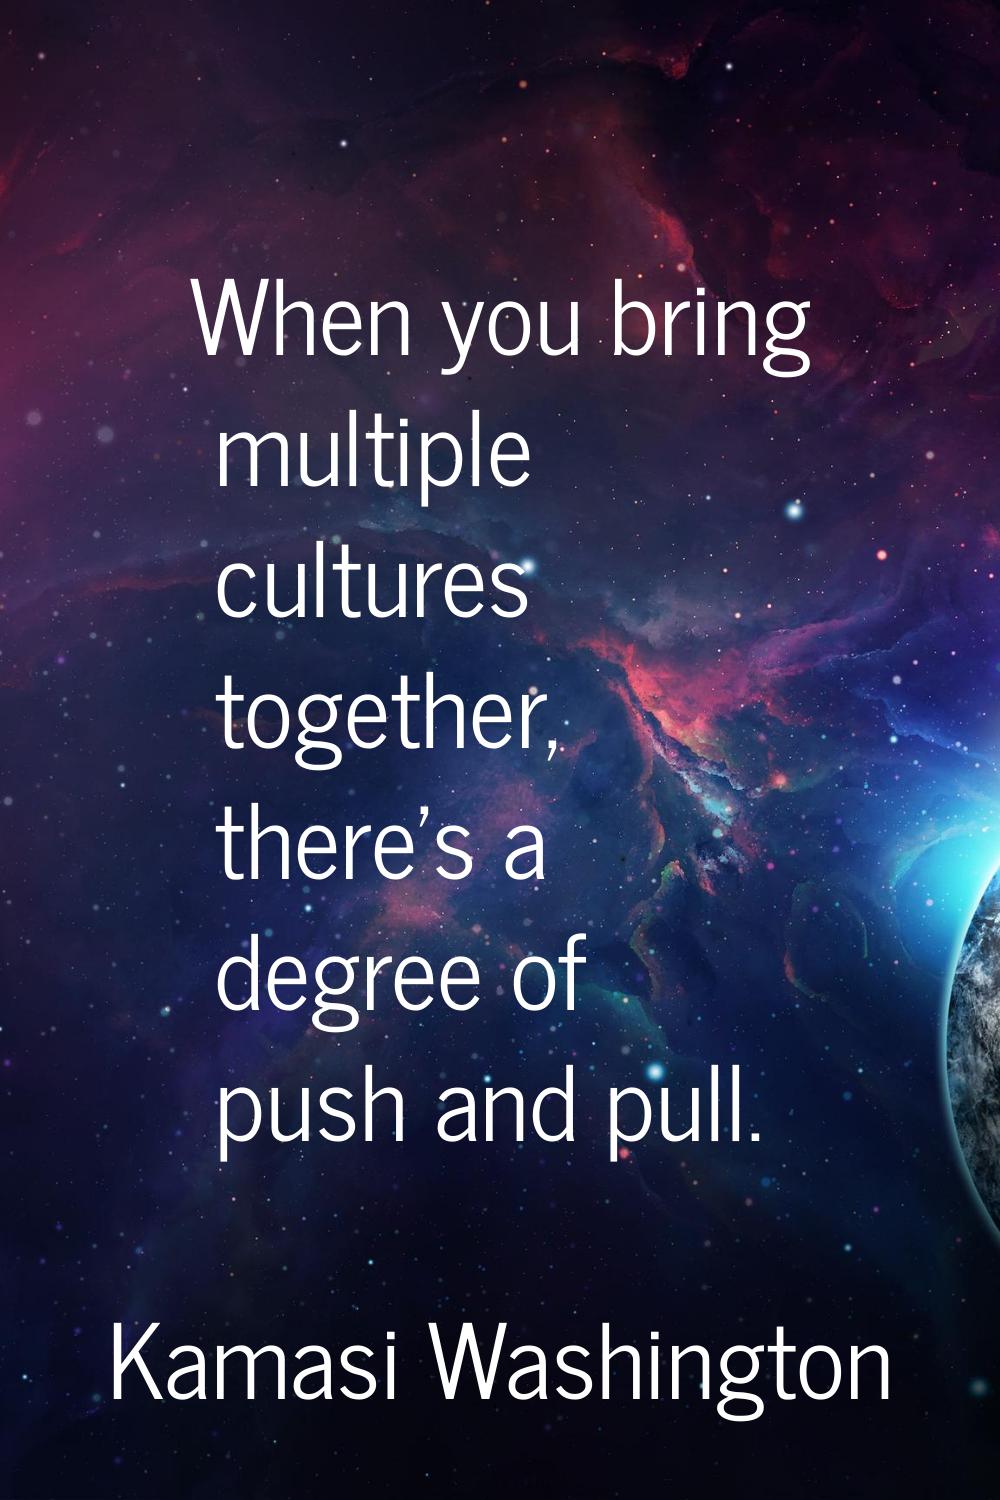 When you bring multiple cultures together, there's a degree of push and pull.